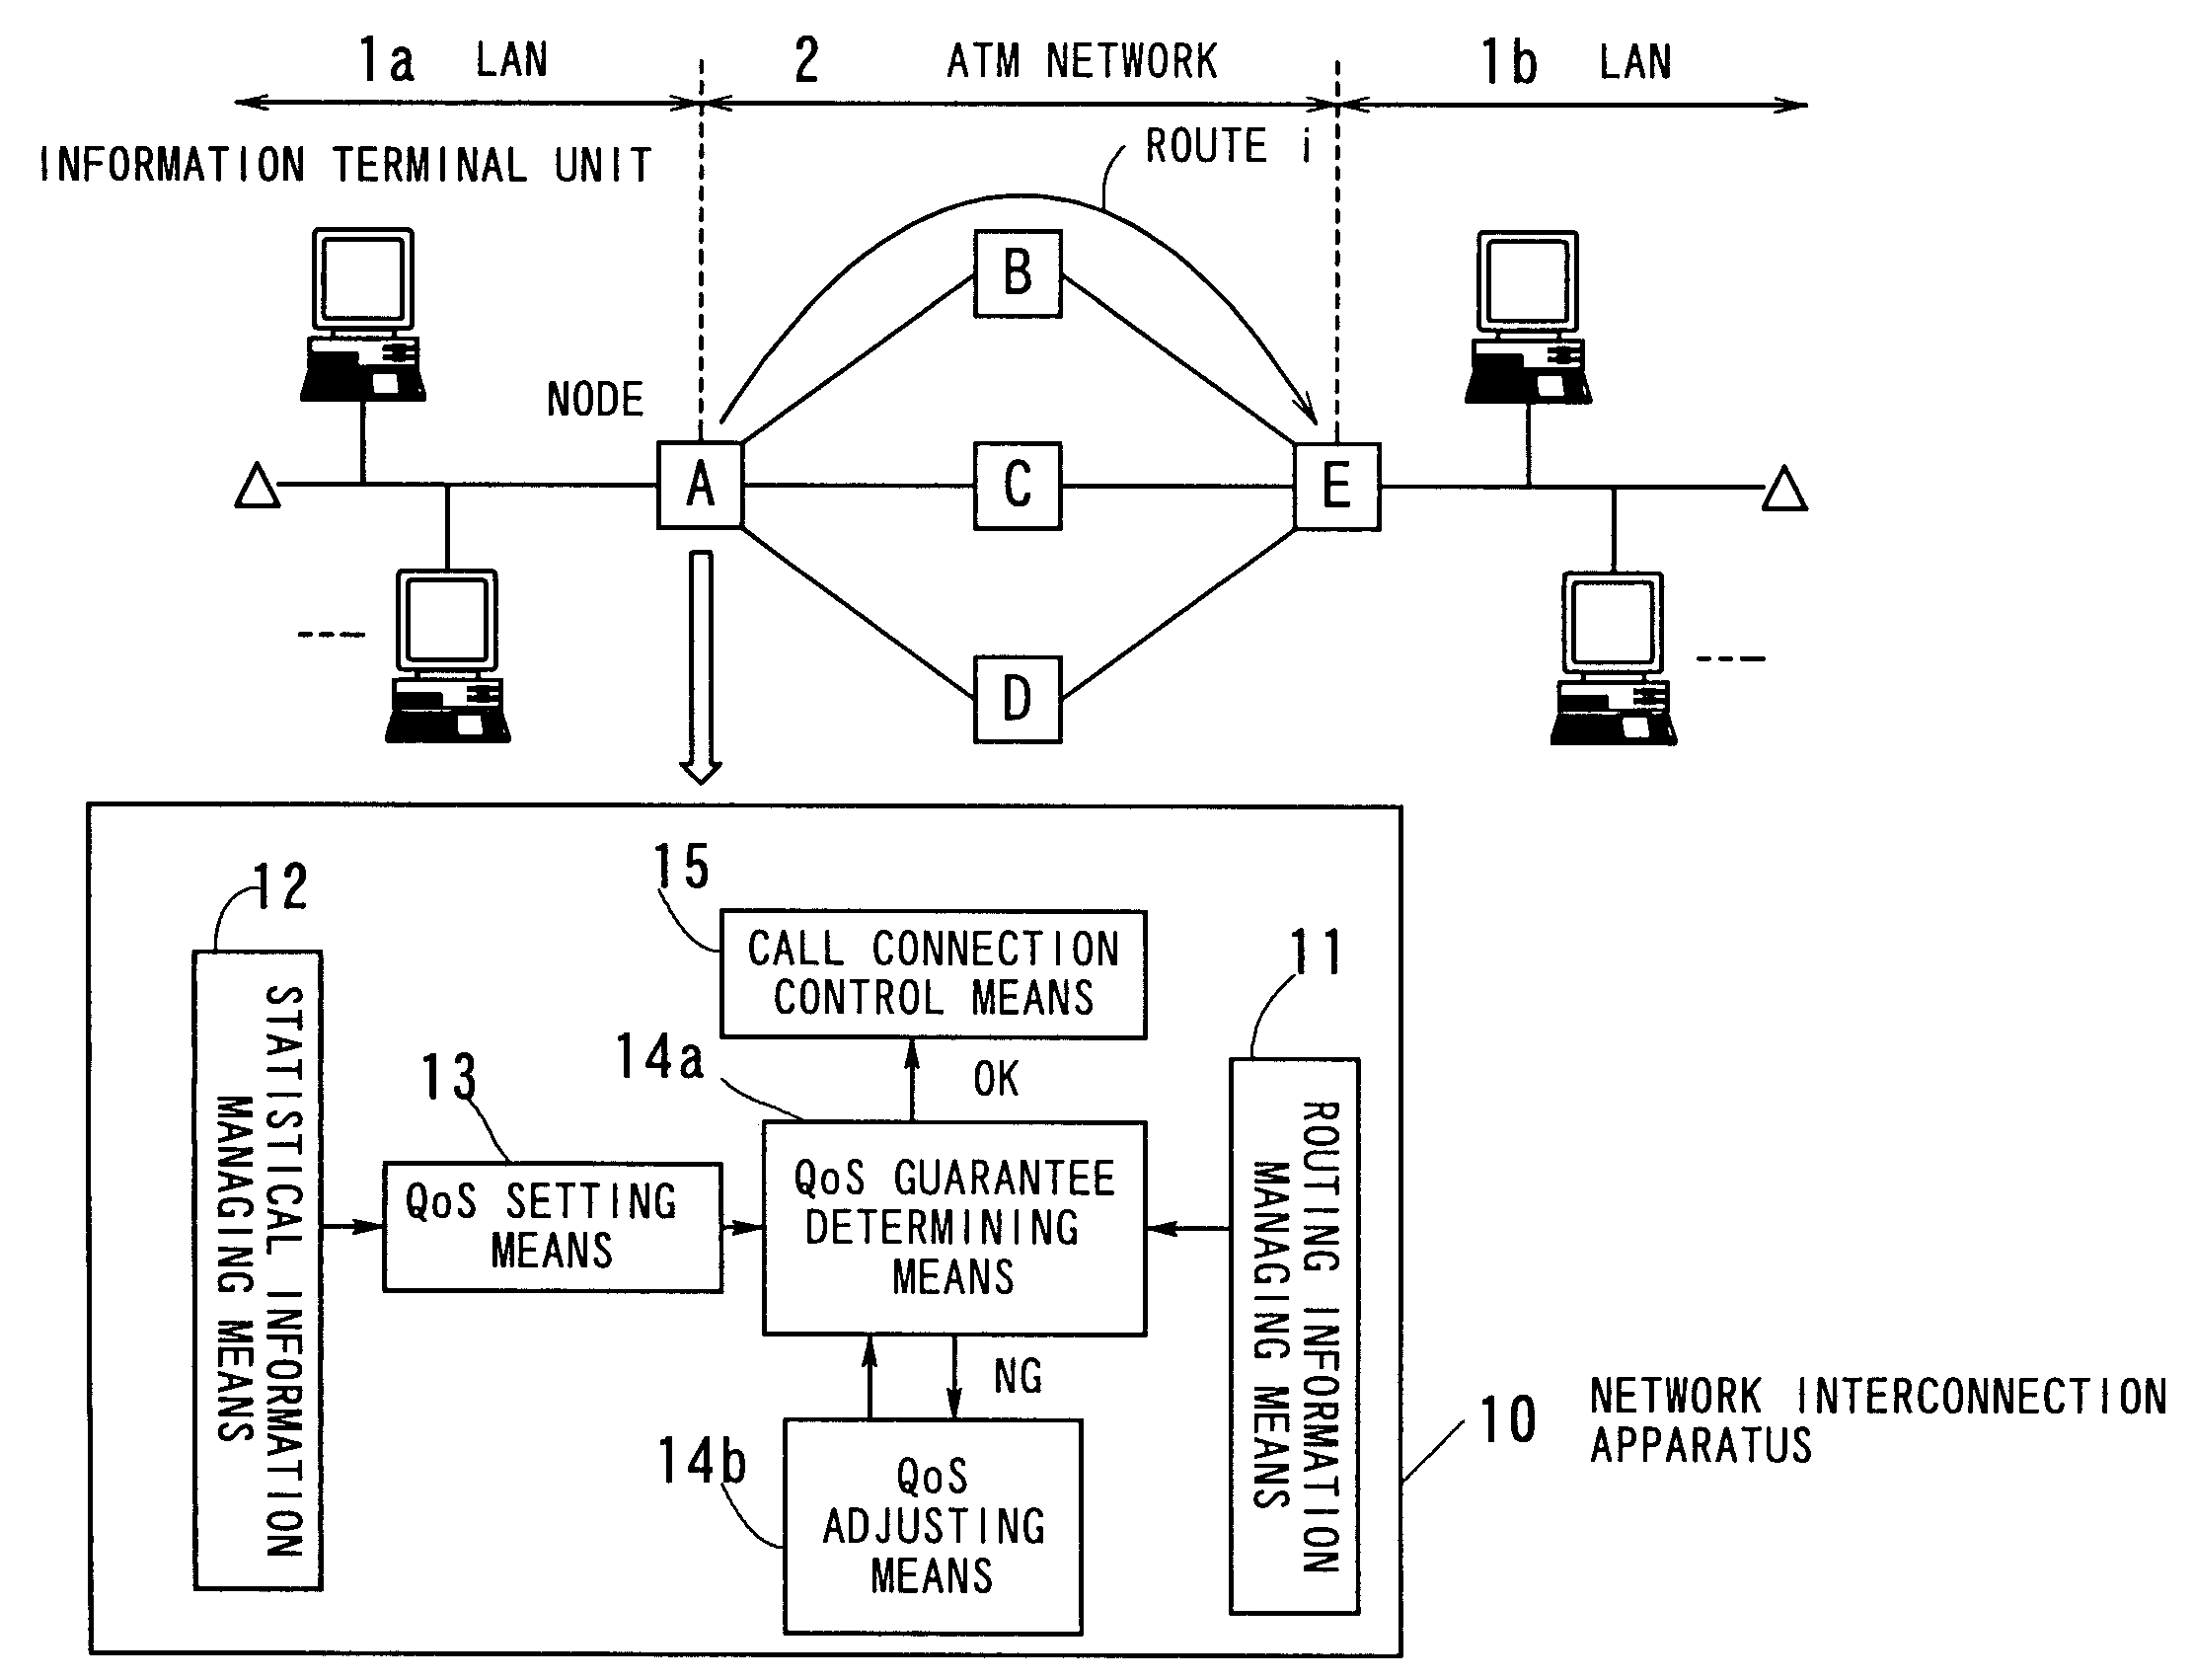 Network interconnection apparatus for interconnecting a LAN and an ATM network using QoS adjustment